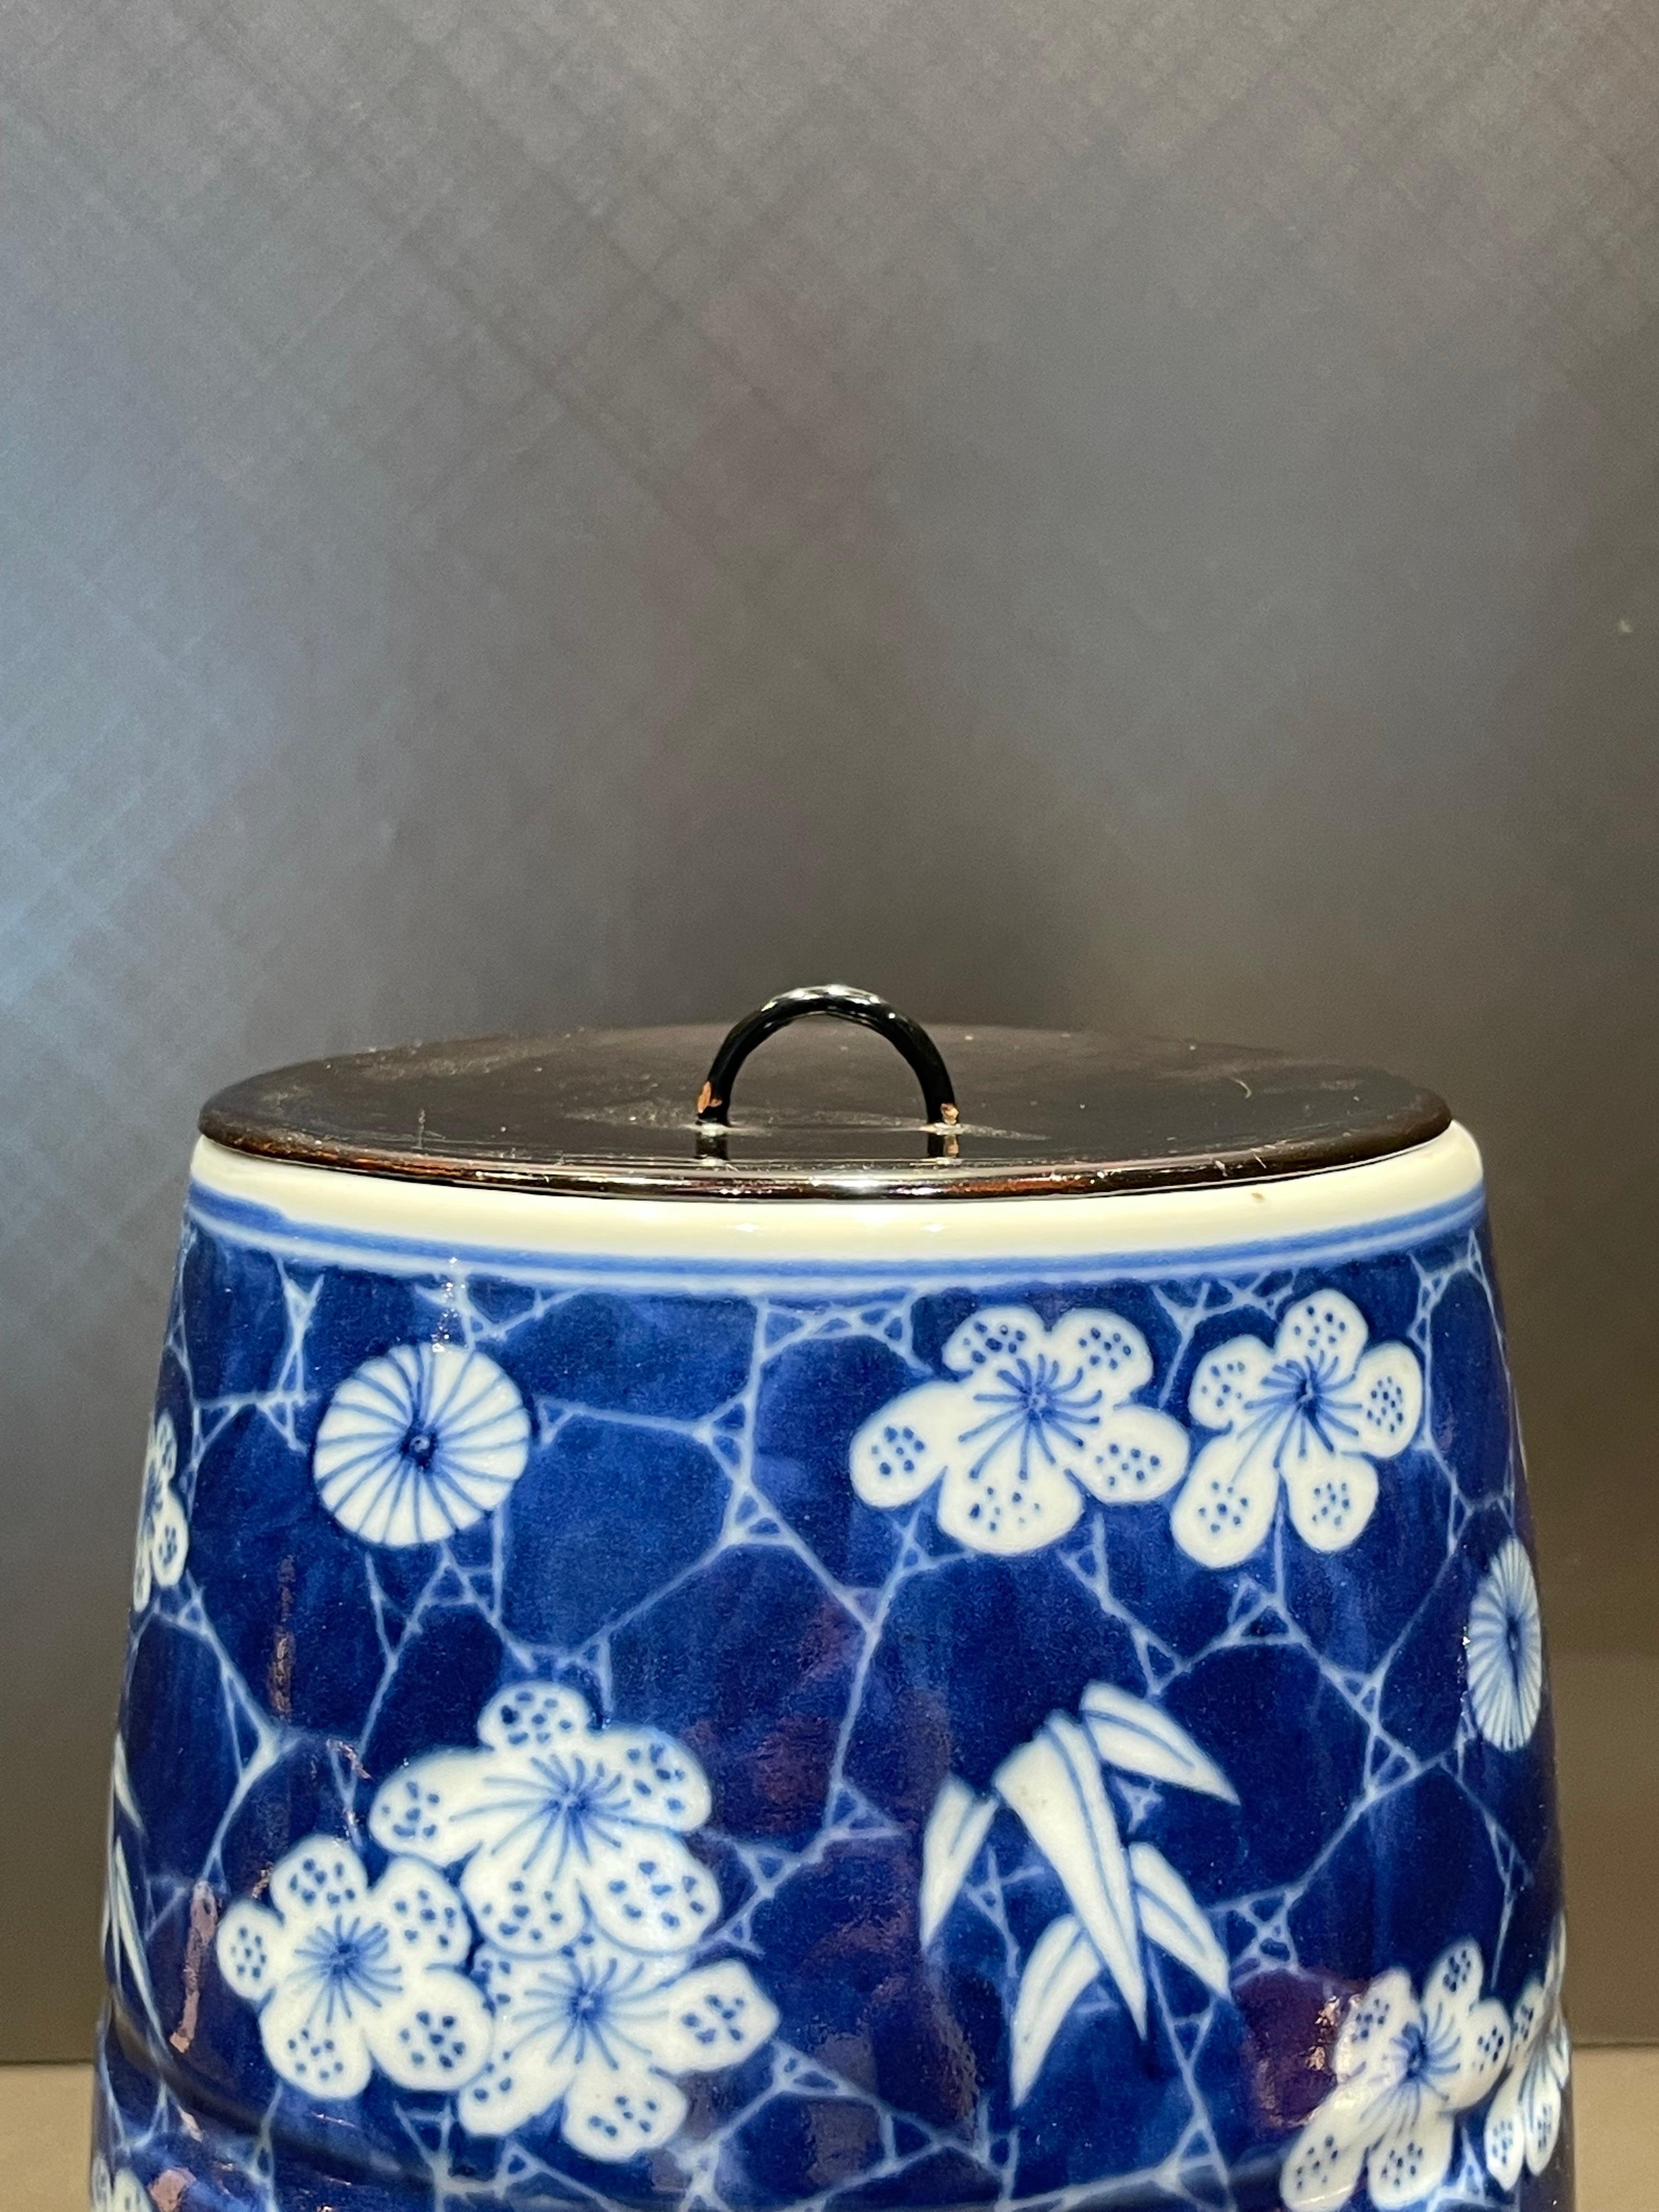 Assumed to be used as a container of fresh water for replenishing the kettle and rising bowls at tea ceremony. With the pattern of Ice Clack, Bamboo and Pine Tree and Plum Blossom design. The cute pattern that evokes a sense of nostalgia is